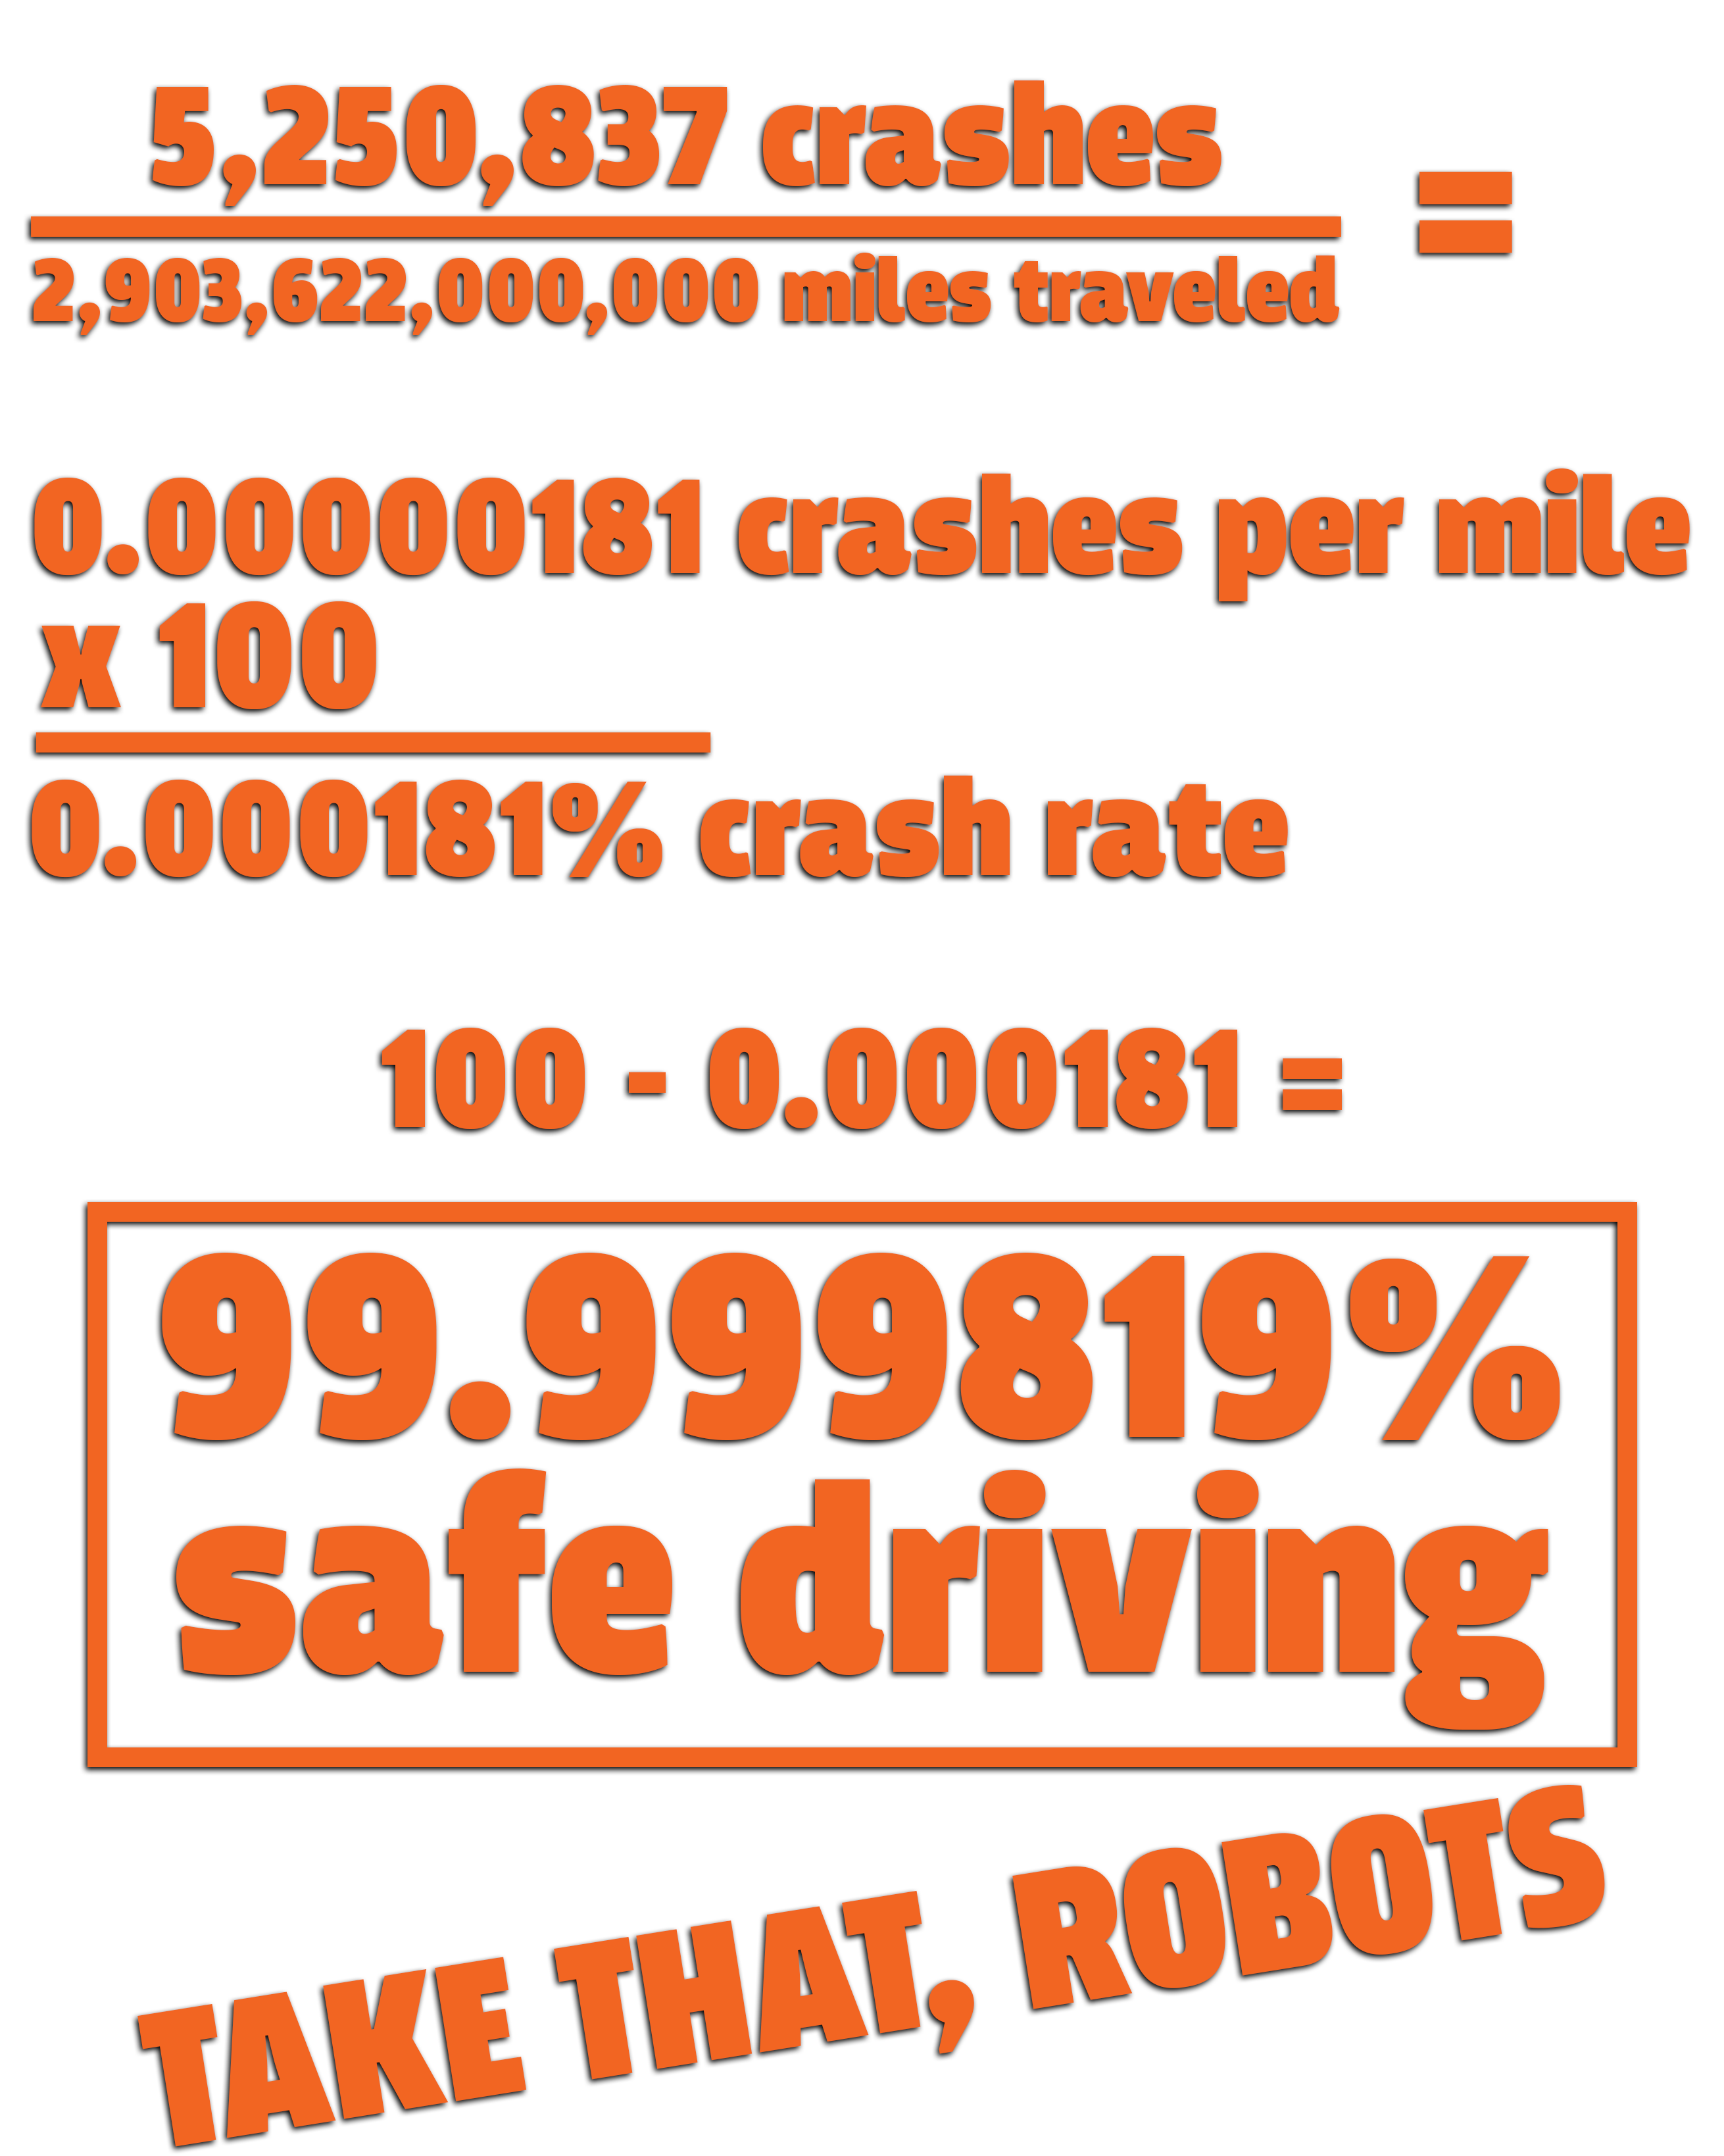 Self-Driving Cars Need to Be 99.99982% Crash-Free to Be Safer Than Humans